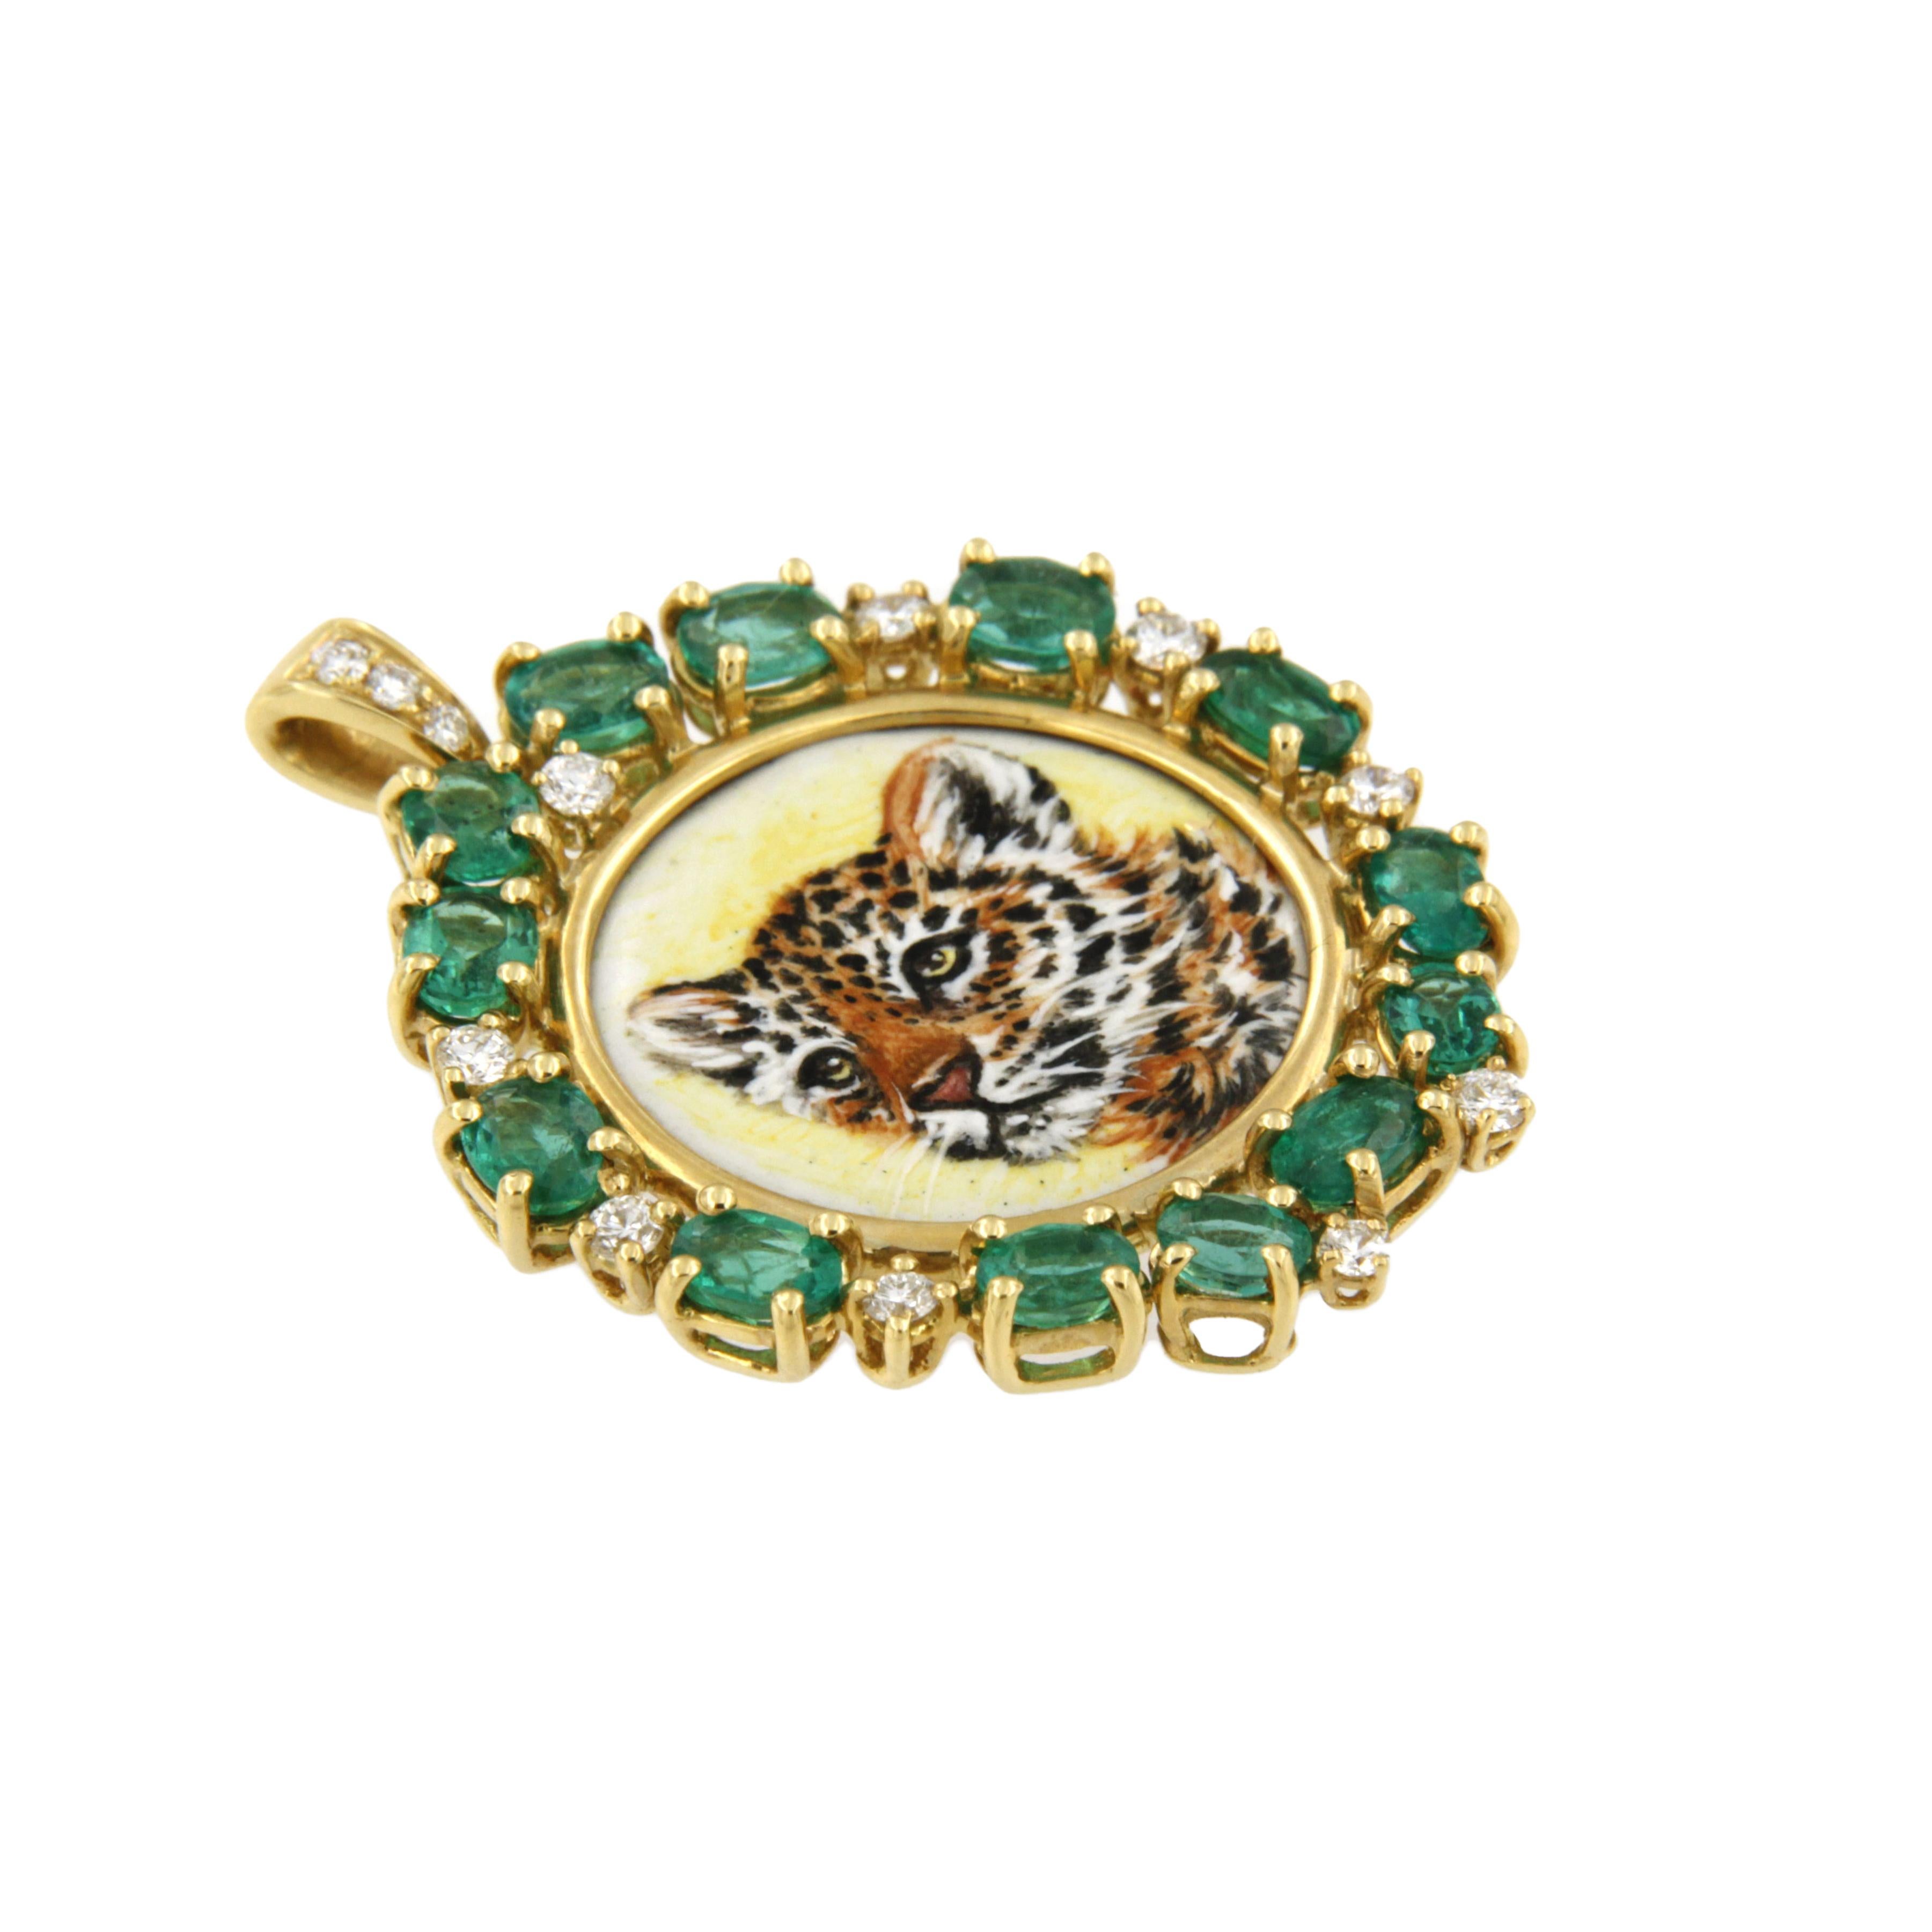 This 18K yellow gold pendant features a leopard cub that is hand-painted in enamel by our artisan in Milan, Italy. The pendant has a halo of oval cut emeralds and brilliant cut white diamonds. 

A luxury gift idea for the animal lover or big cat